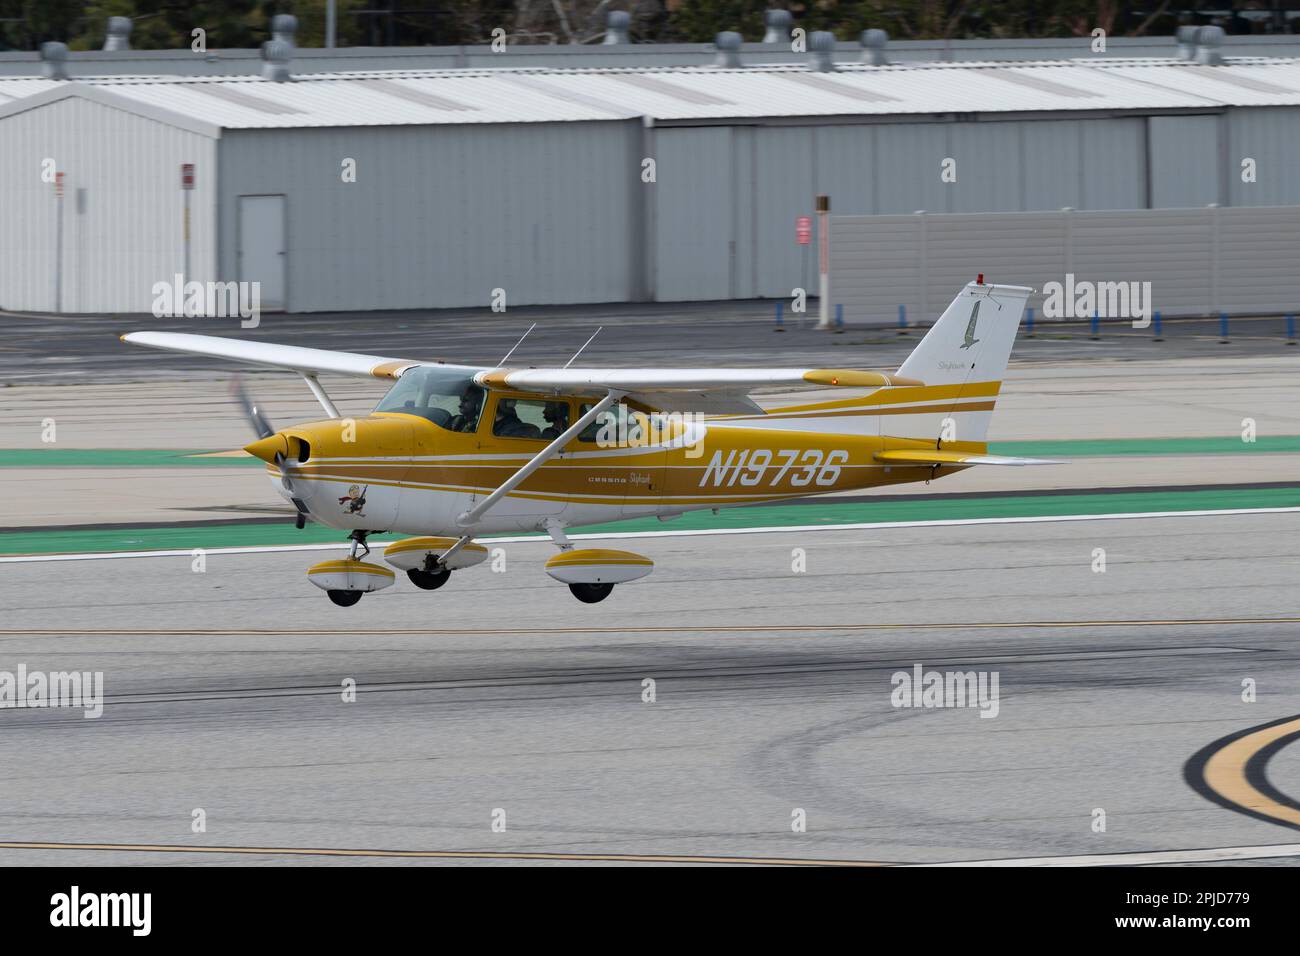 Santa Monica, California, USA. 31st Mar, 2023. A Cessna 172 Skyhawk in yellow paint.Santa Monica Airport (ICAO: KSMO) is a general aviation airport serving FBOs, flight schools and hobbyists. Its location near residential areas and it's short runway have caused controversy and led to efforts to close the airport. The FAA announced the airport will close in 2028 to be converted into a public park. The airport has a rich history, having been used for aviation purposes since 1917 where it was home to the Douglas Aircraft Corporation. In the early days of aviation, the airport served a Stock Photo